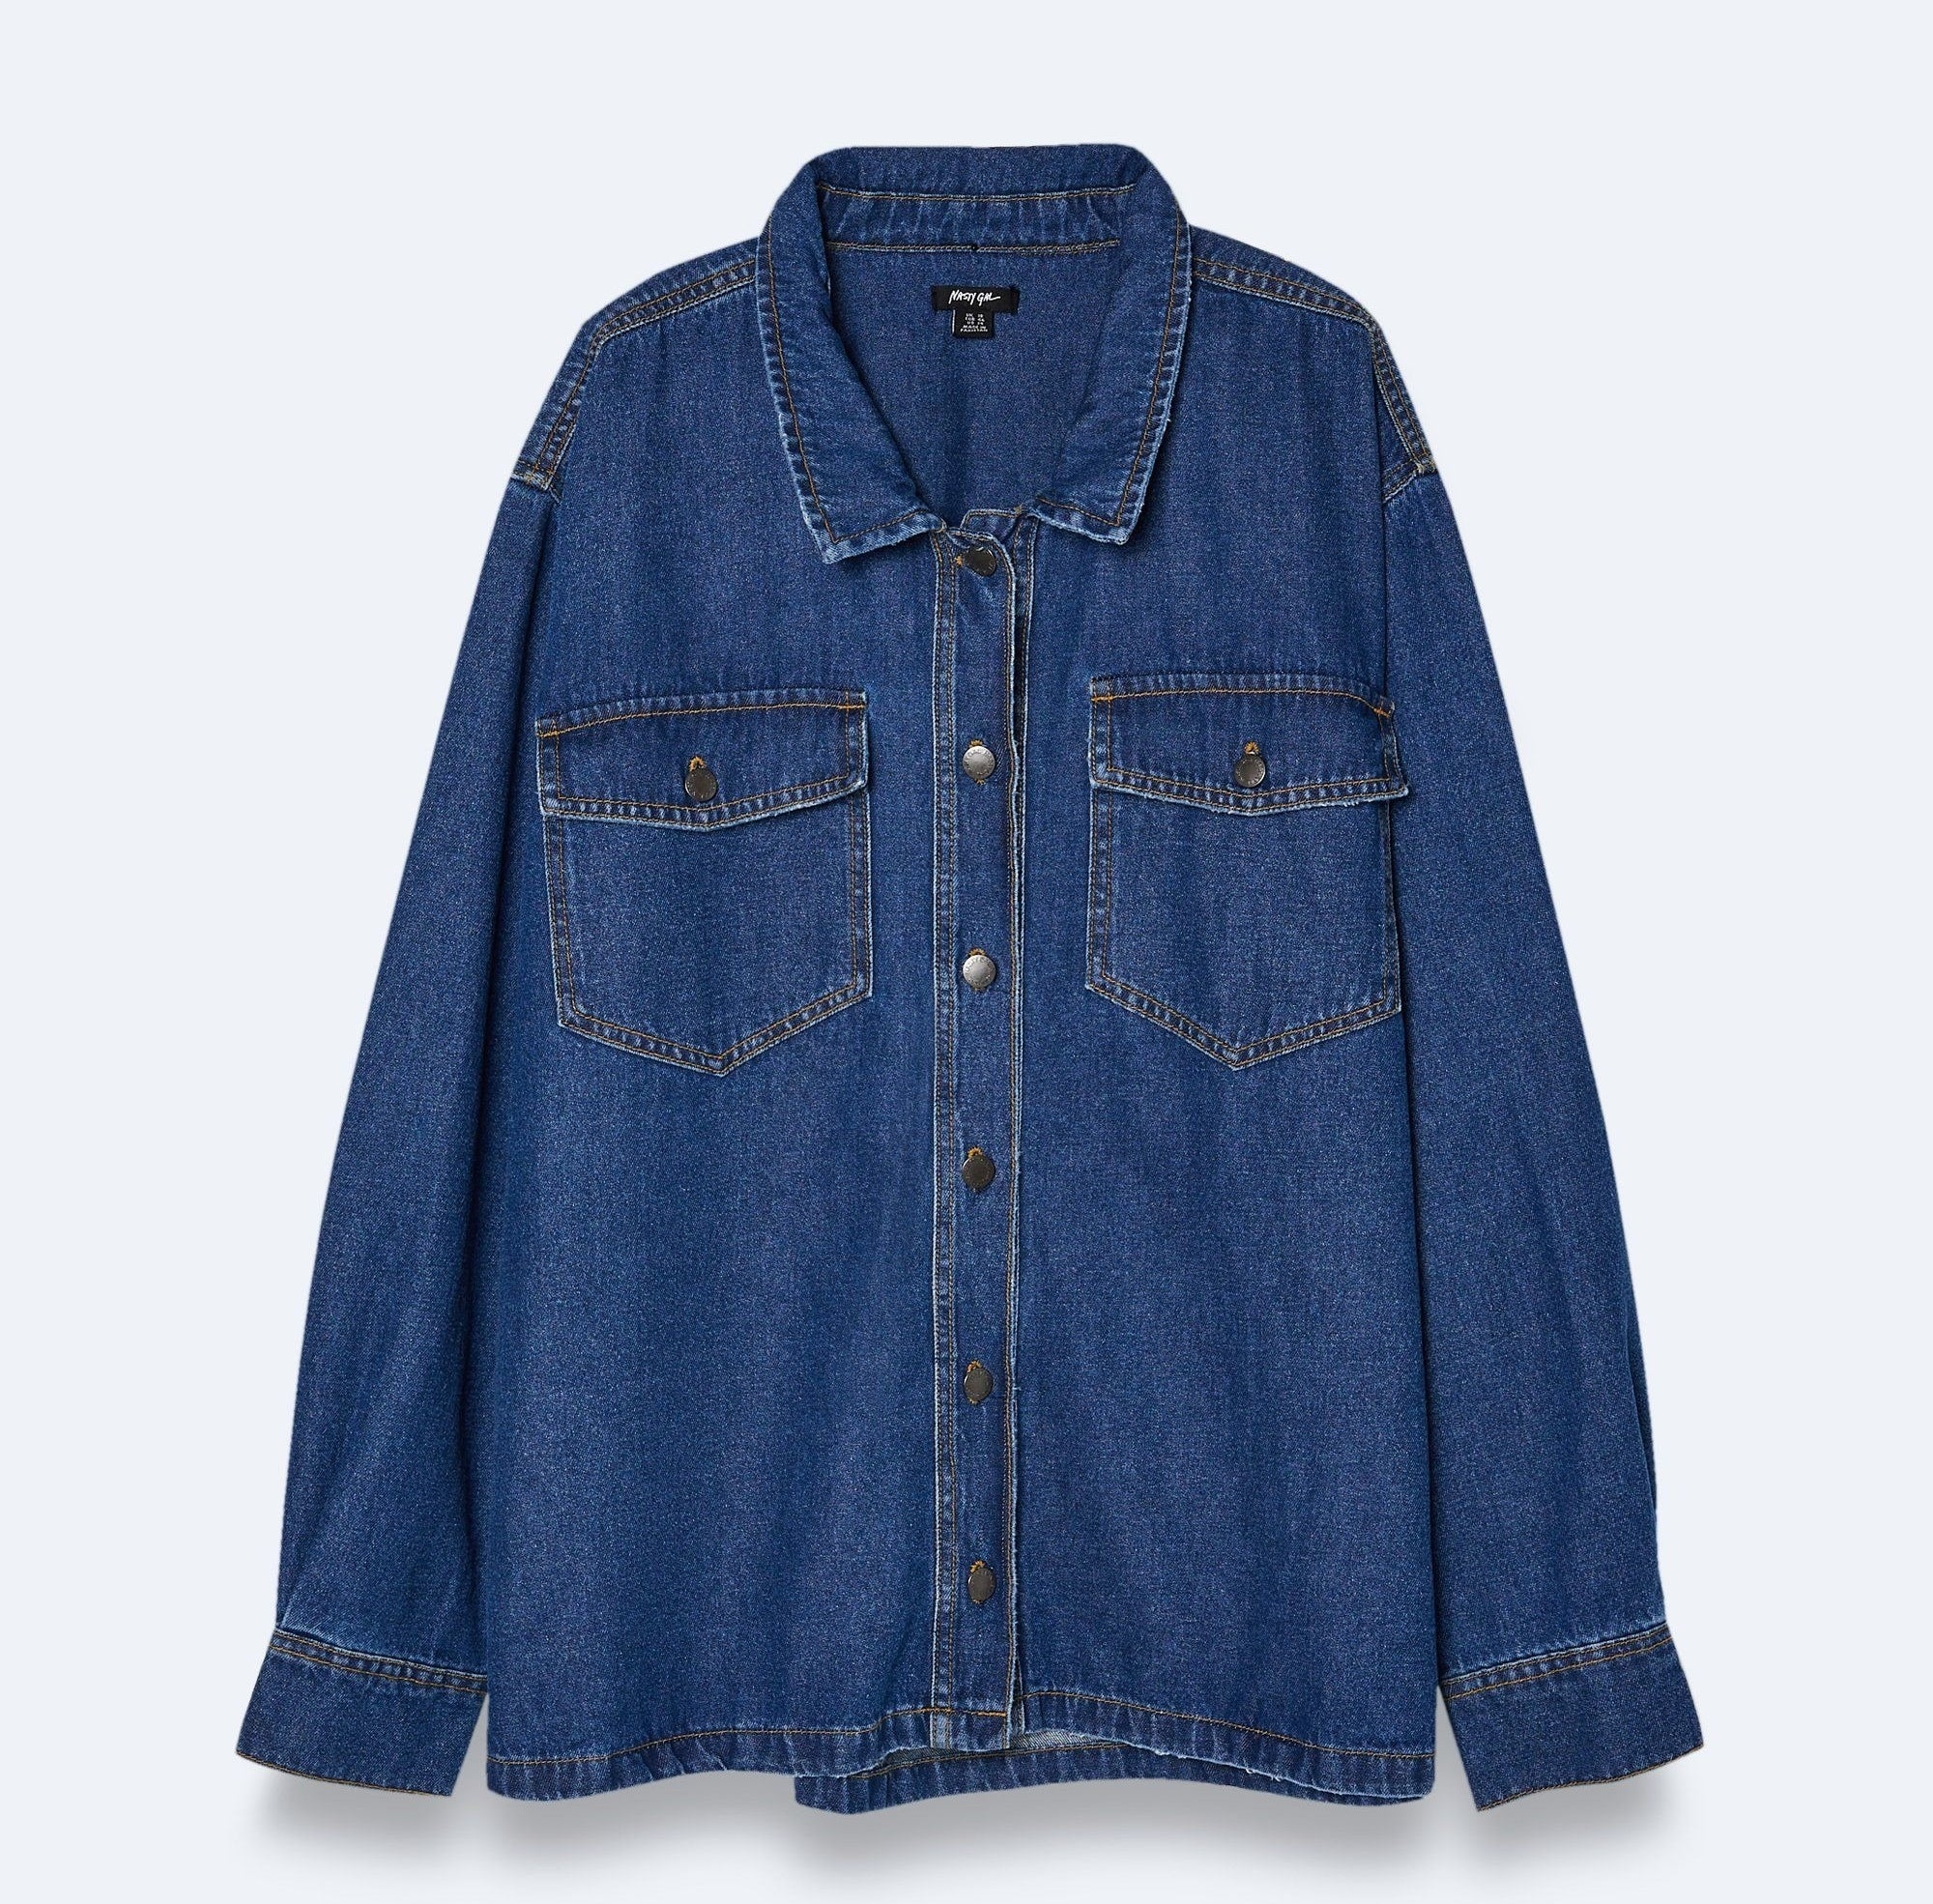 Denim shirt with button-up front and two chest pockets on a plain background, suggesting a casual style